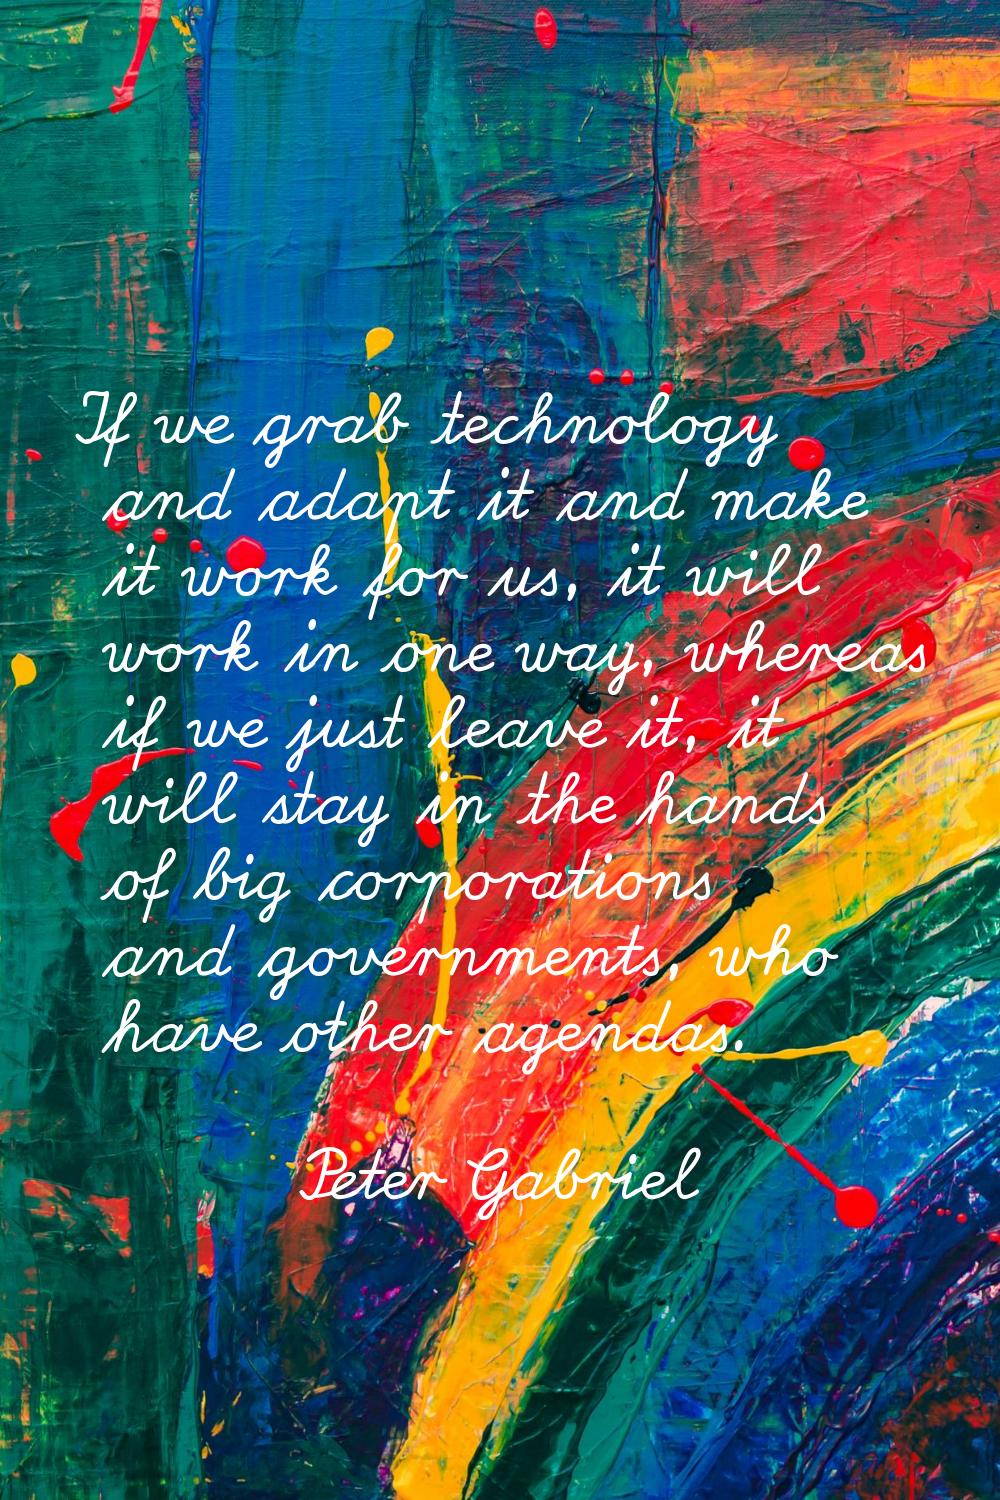 If we grab technology and adapt it and make it work for us, it will work in one way, whereas if we 